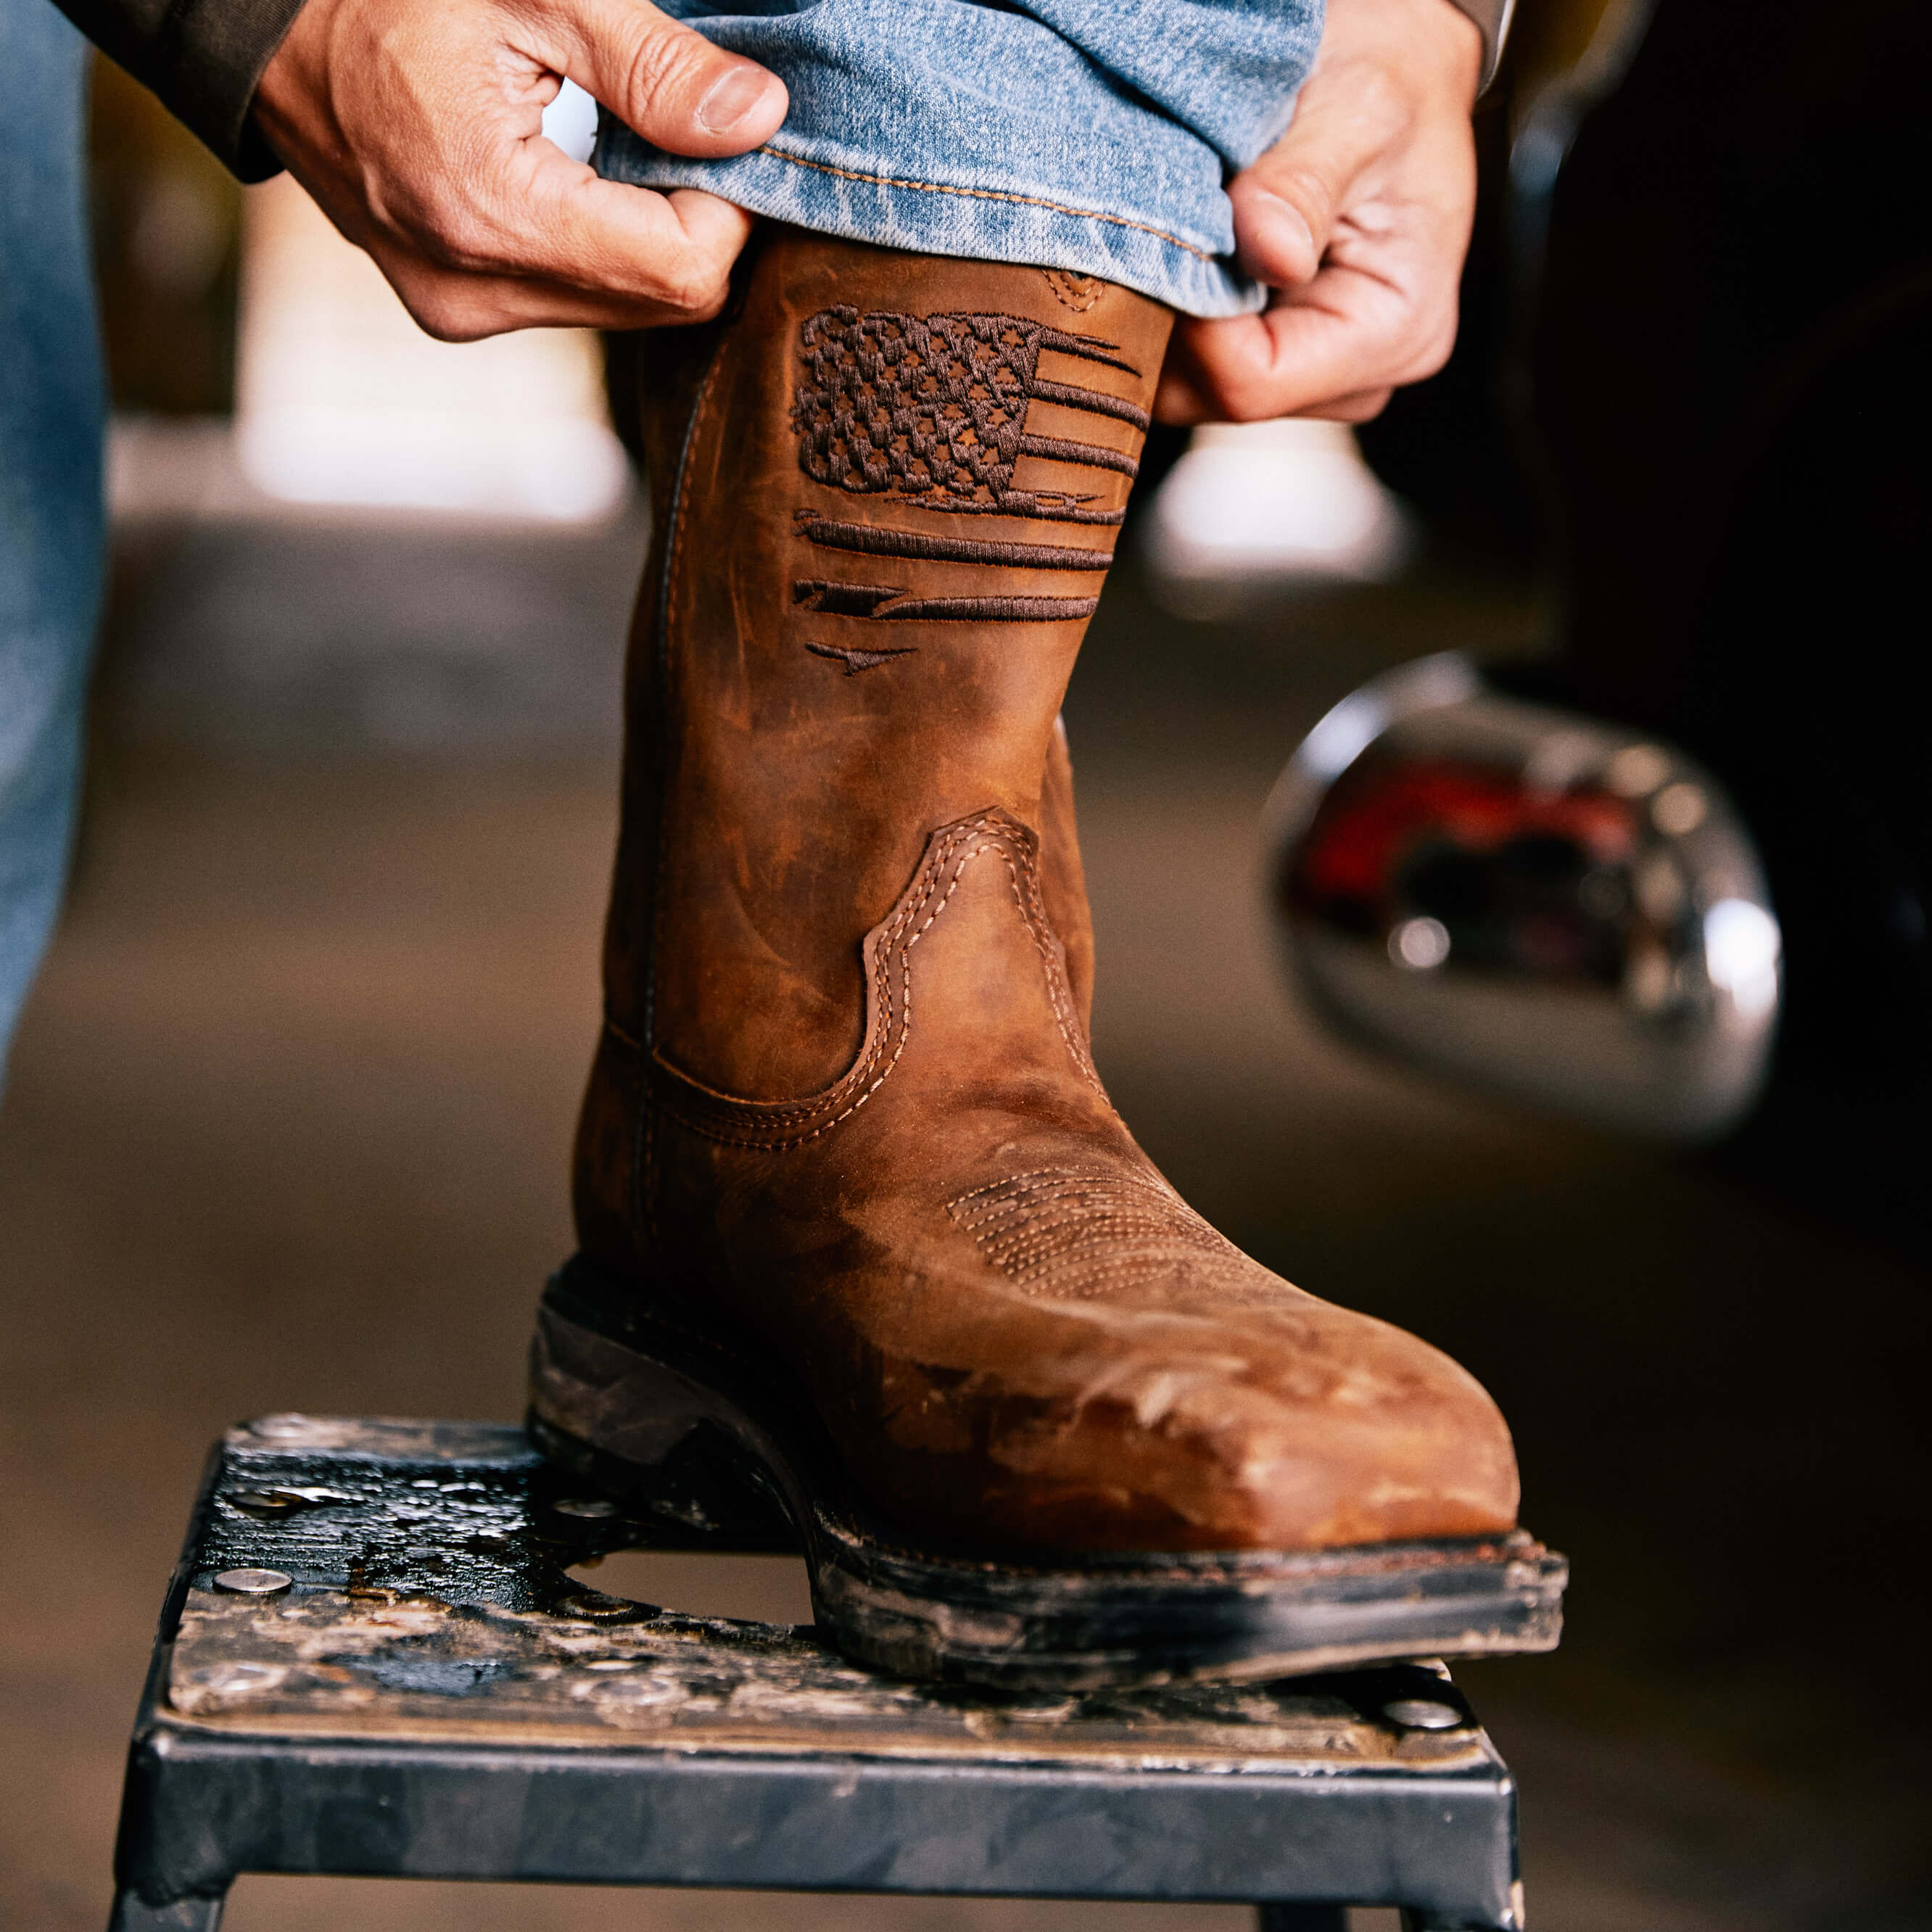 Men's Leather Work Boots “WorkHog XT Patriot H20” By Ariat 10036002 AB ...